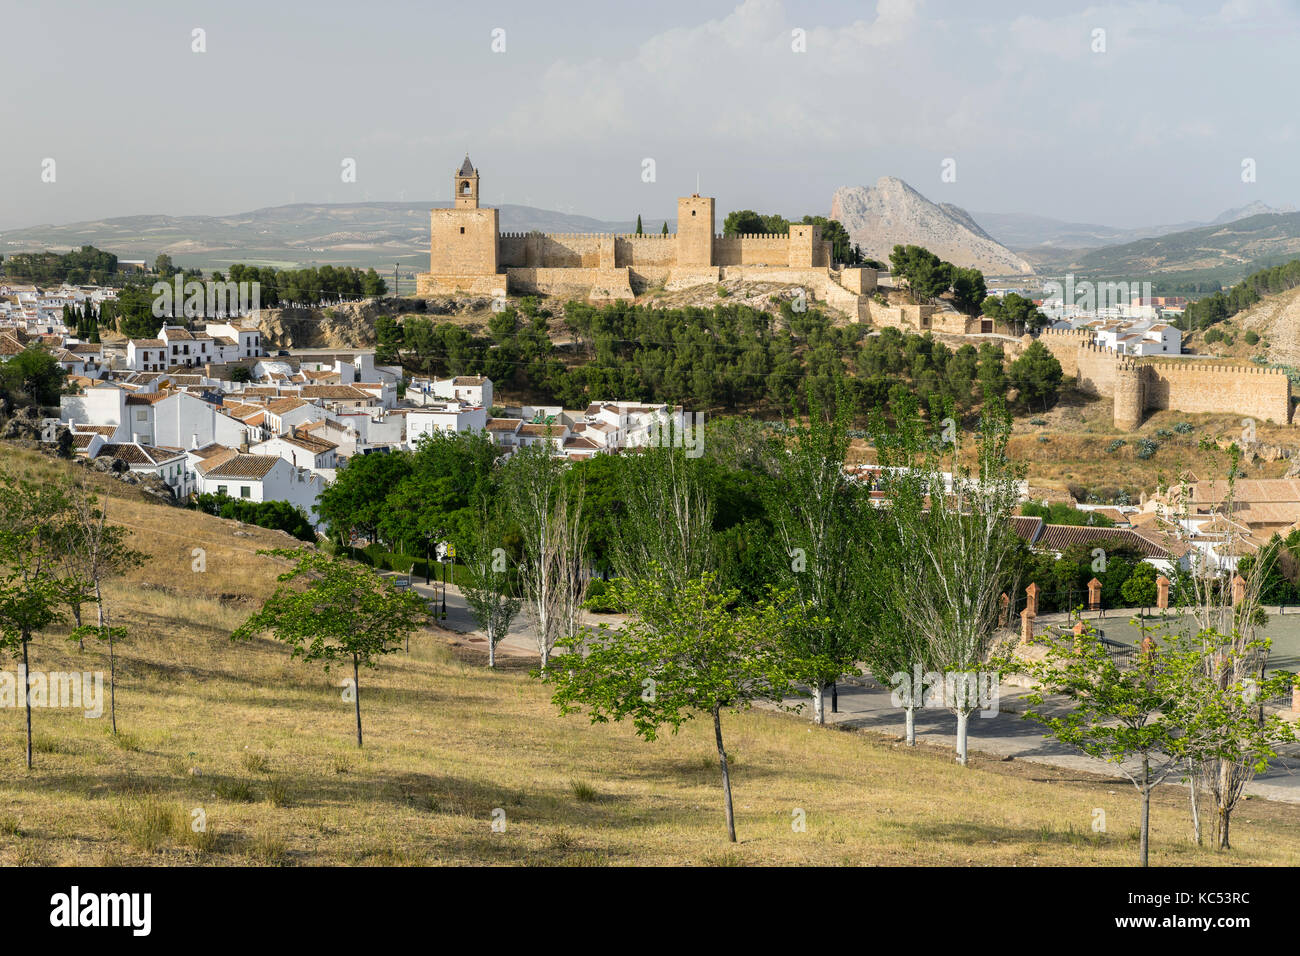 Old town with fortress Alcazaba, Antequera, province of Malaga, Andalusia, Spain Stock Photo